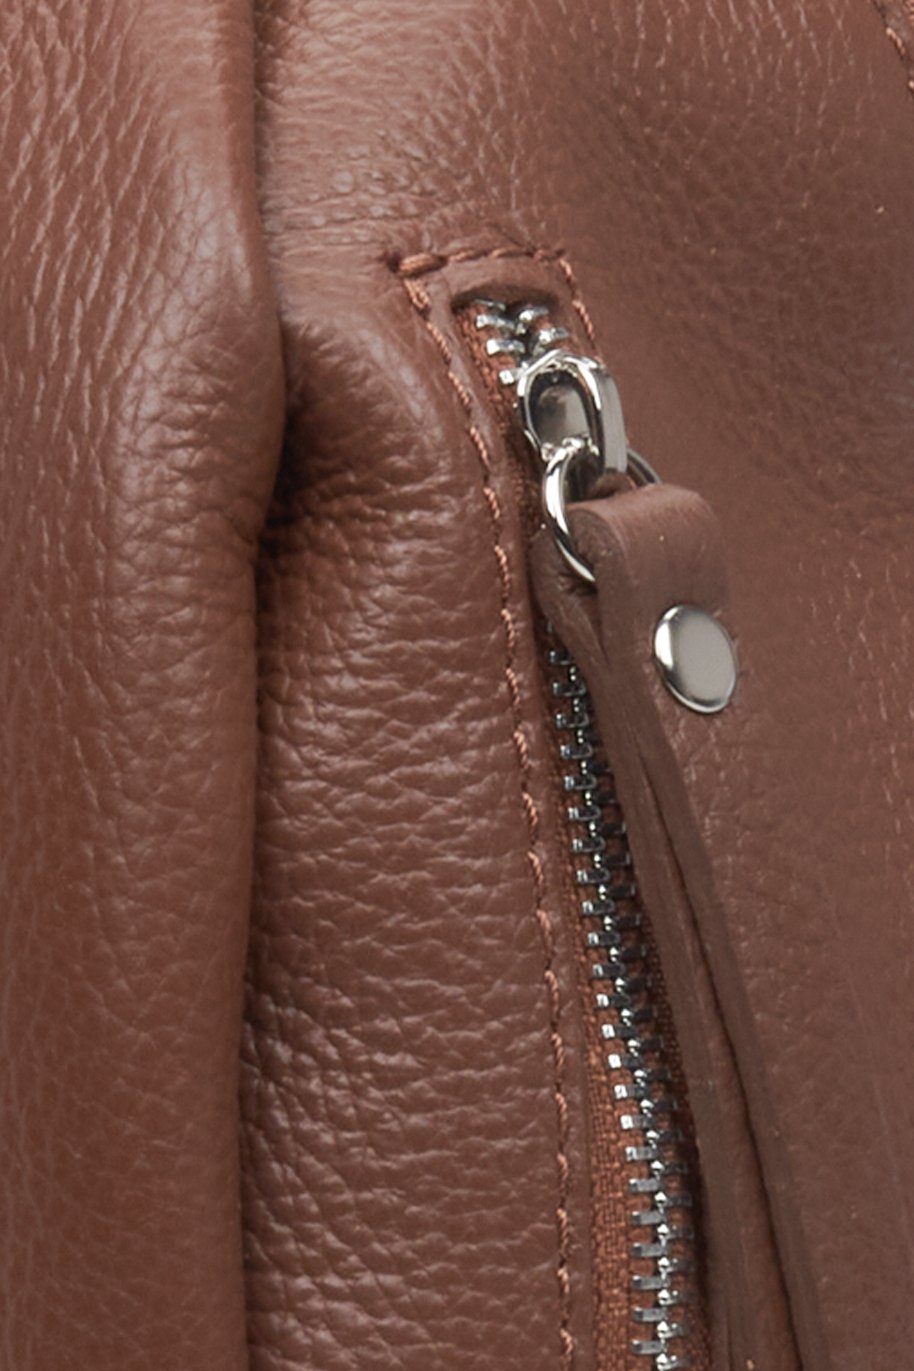 Elegant women's brown leather backpack with silver accents - close-up on details.